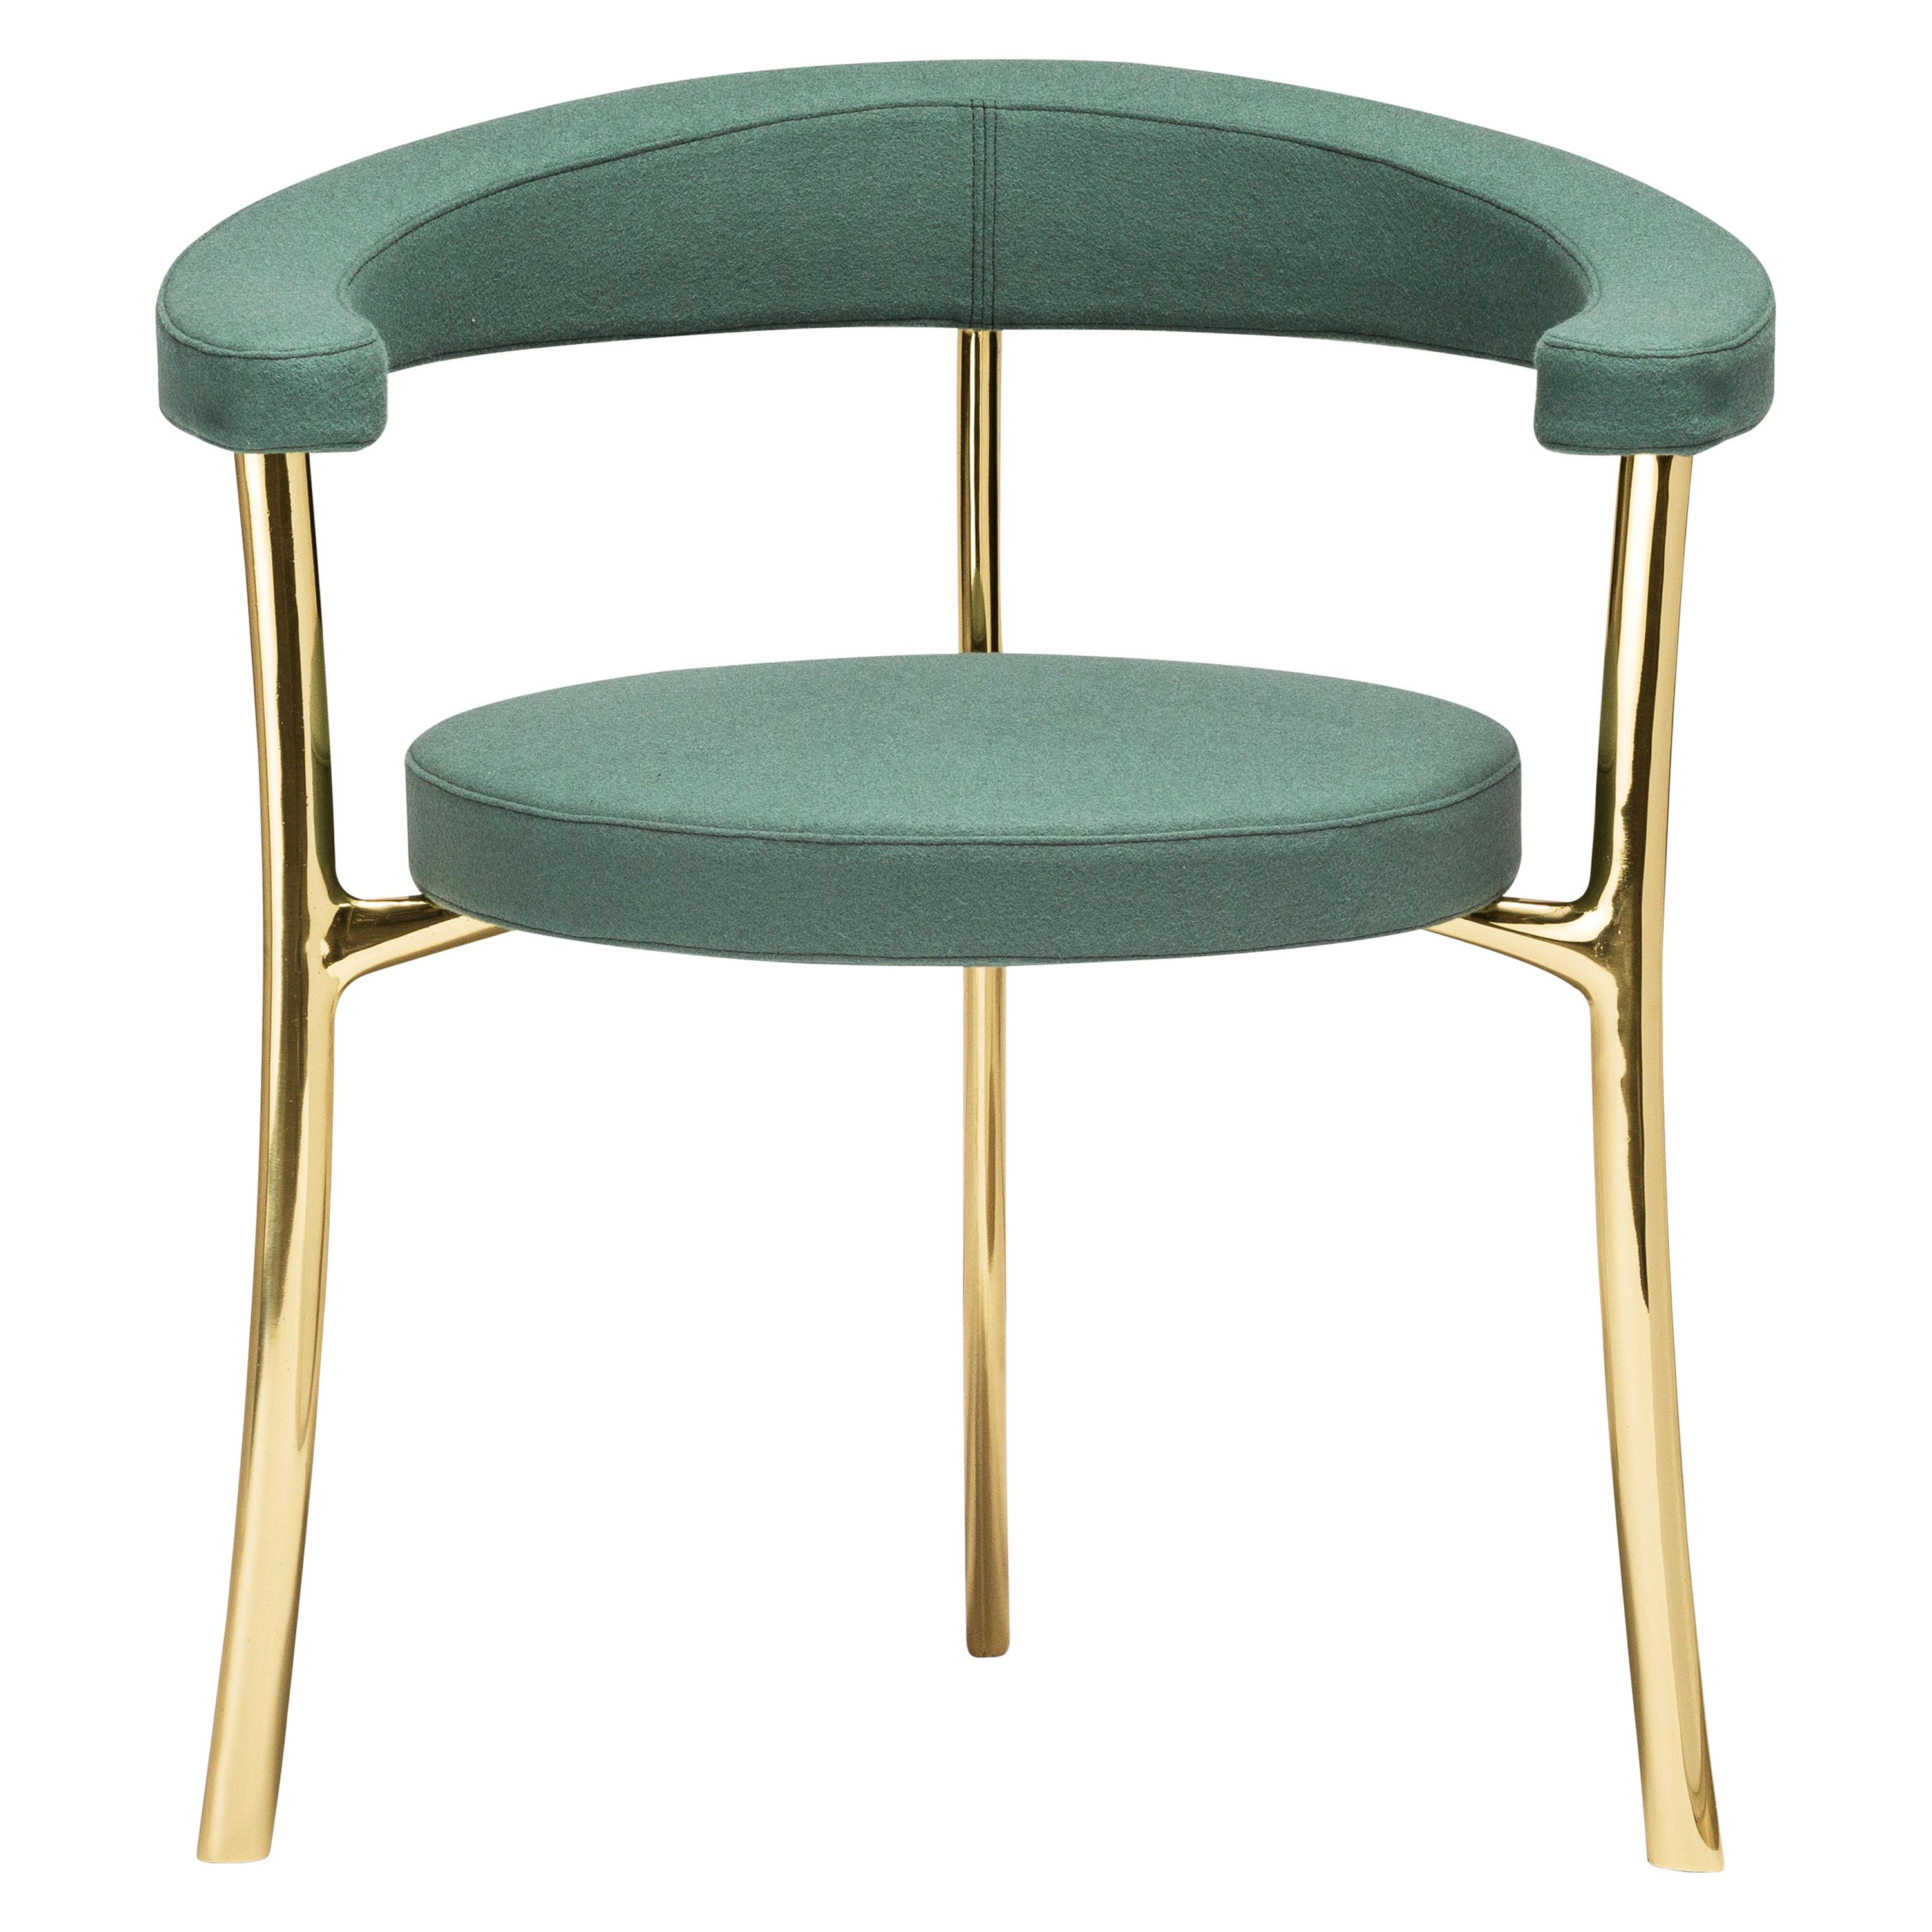 Katana Armchair in Dark Green Fabric with Polished Brass by Paolo Rizzatto